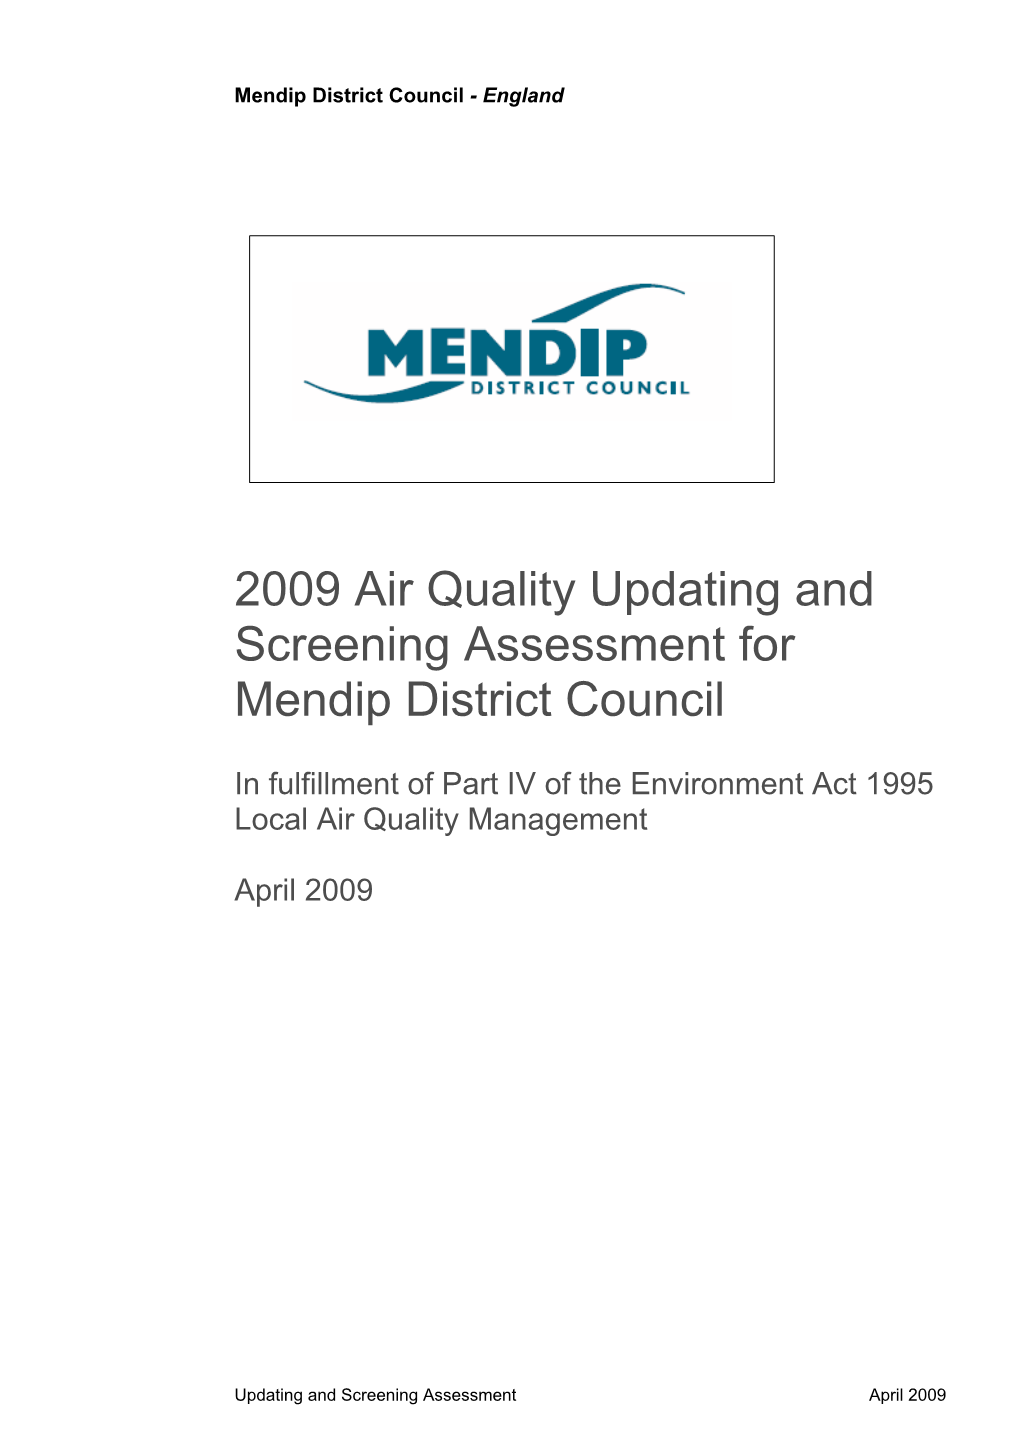 Air Quality Report 2009